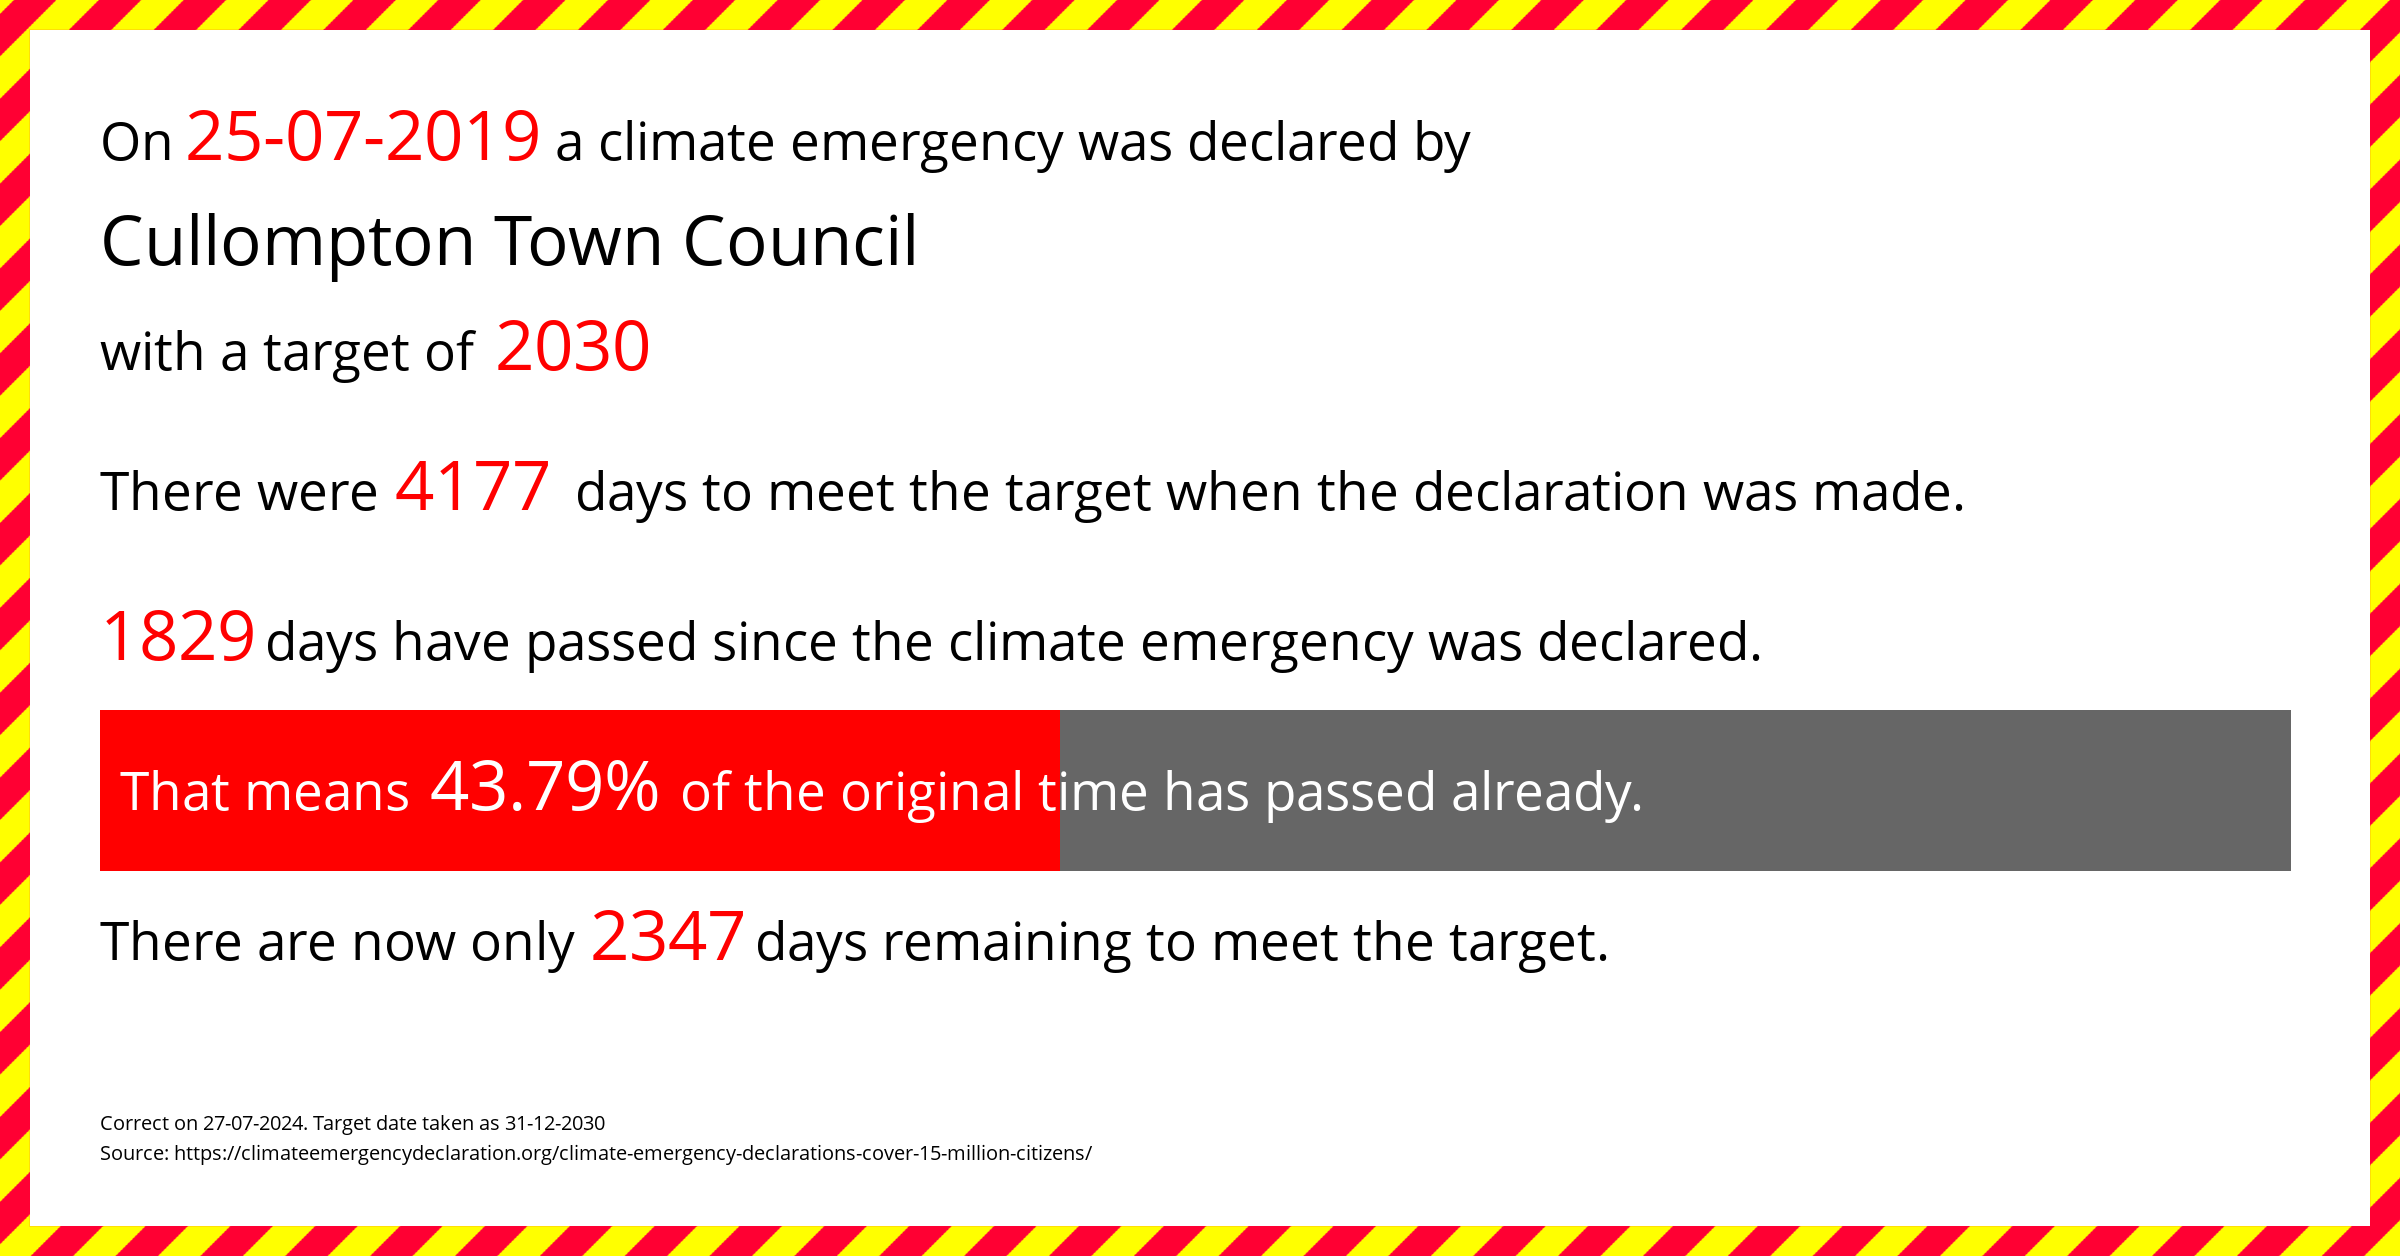 Cullompton Town Council declared a Climate emergency on Thursday 25th July 2019, with a target of 2030.